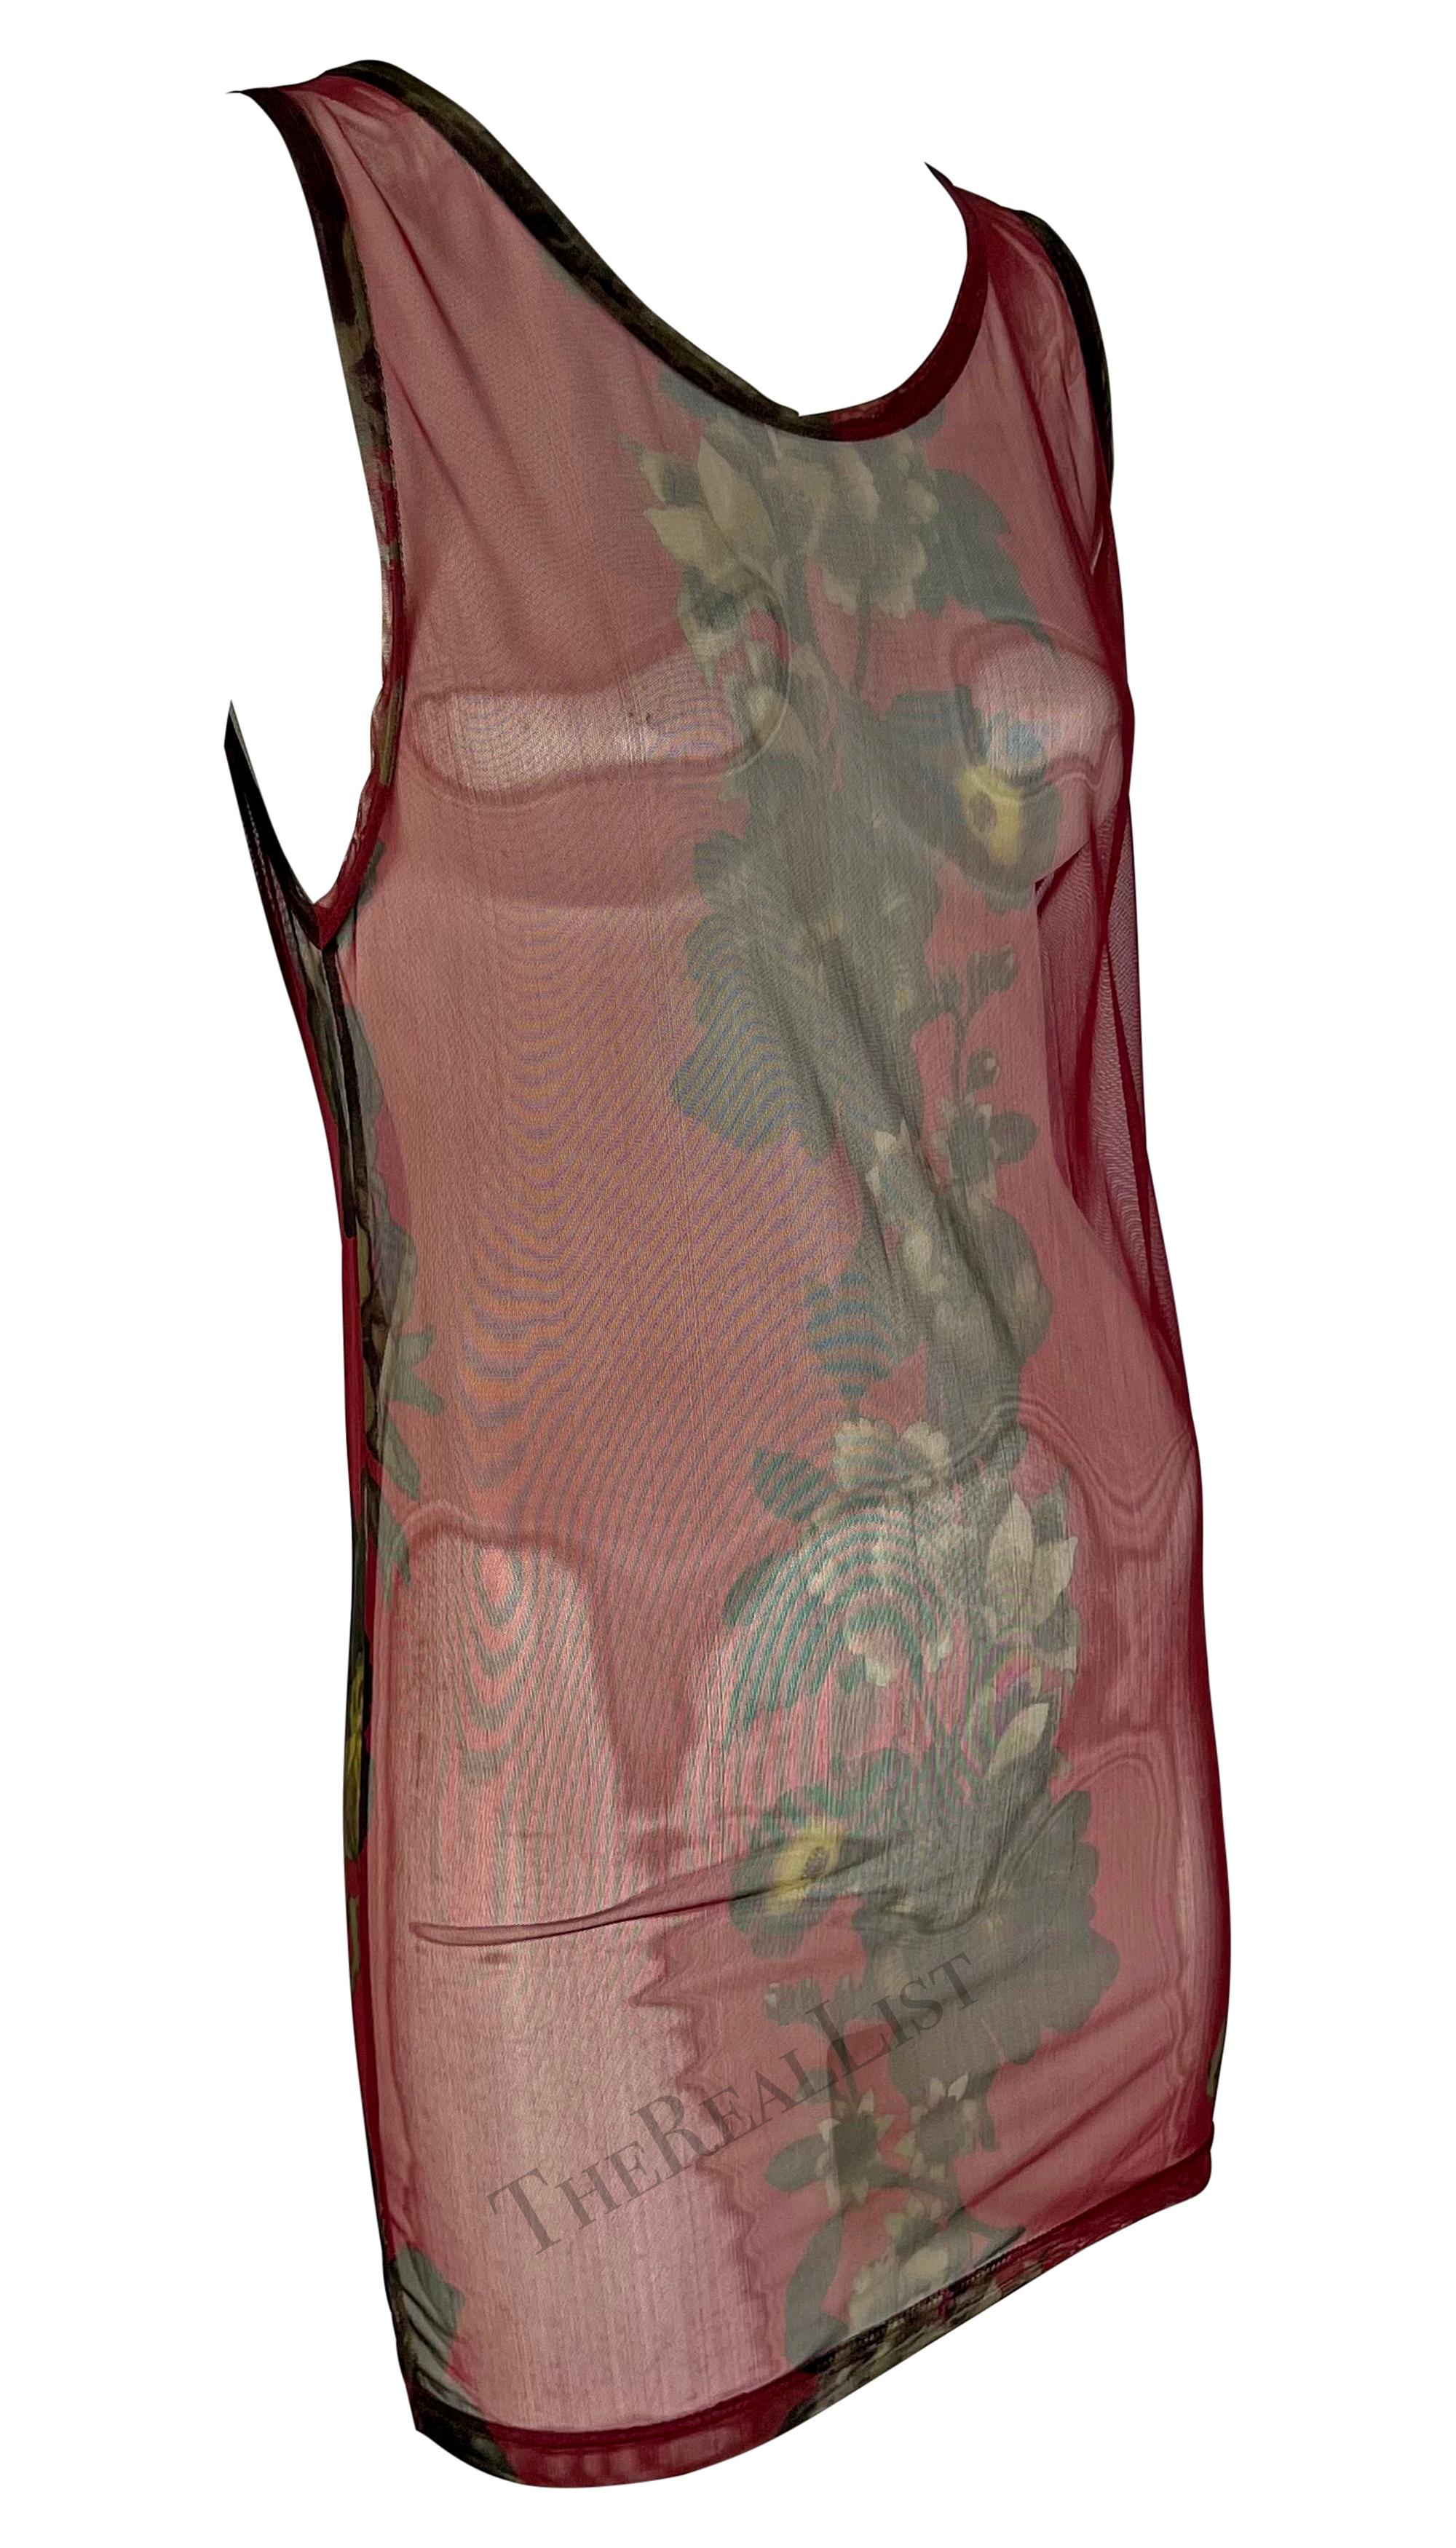 S/S 1999 Gucci by Tom Ford Red Floral Sheer Men's Burgundy Tank Top Mini Dress For Sale 3